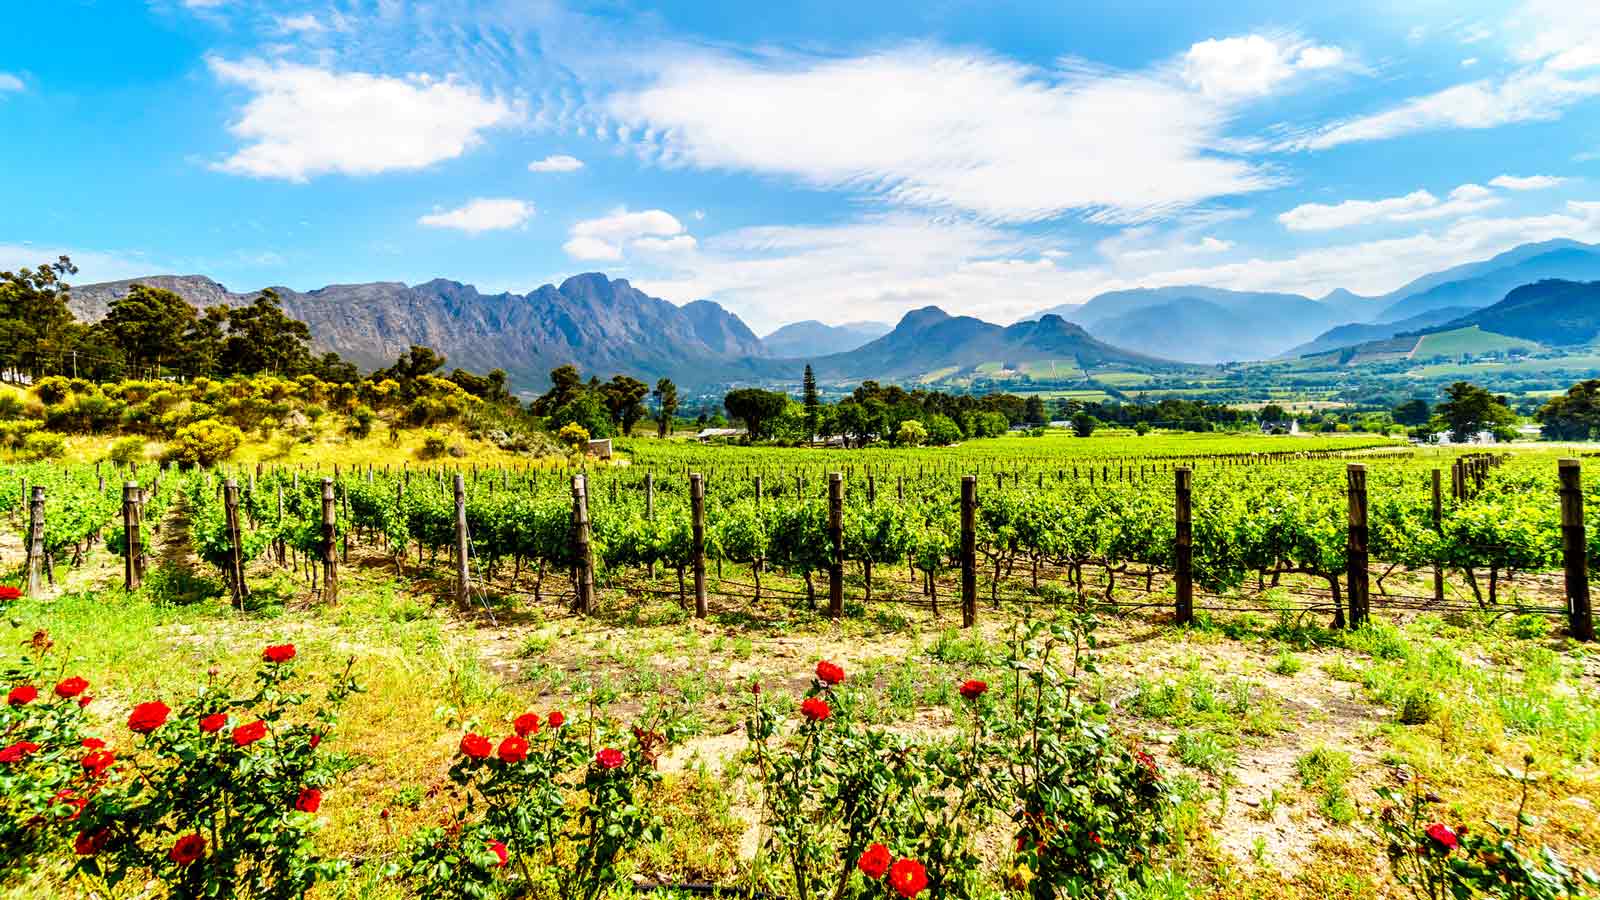 <p>Step into another part of the world when visiting Franschhoek in the Western Cape. This gorgeous town has tree-lined streets, incredible mountain views, and a delectable culinary scene. </p>